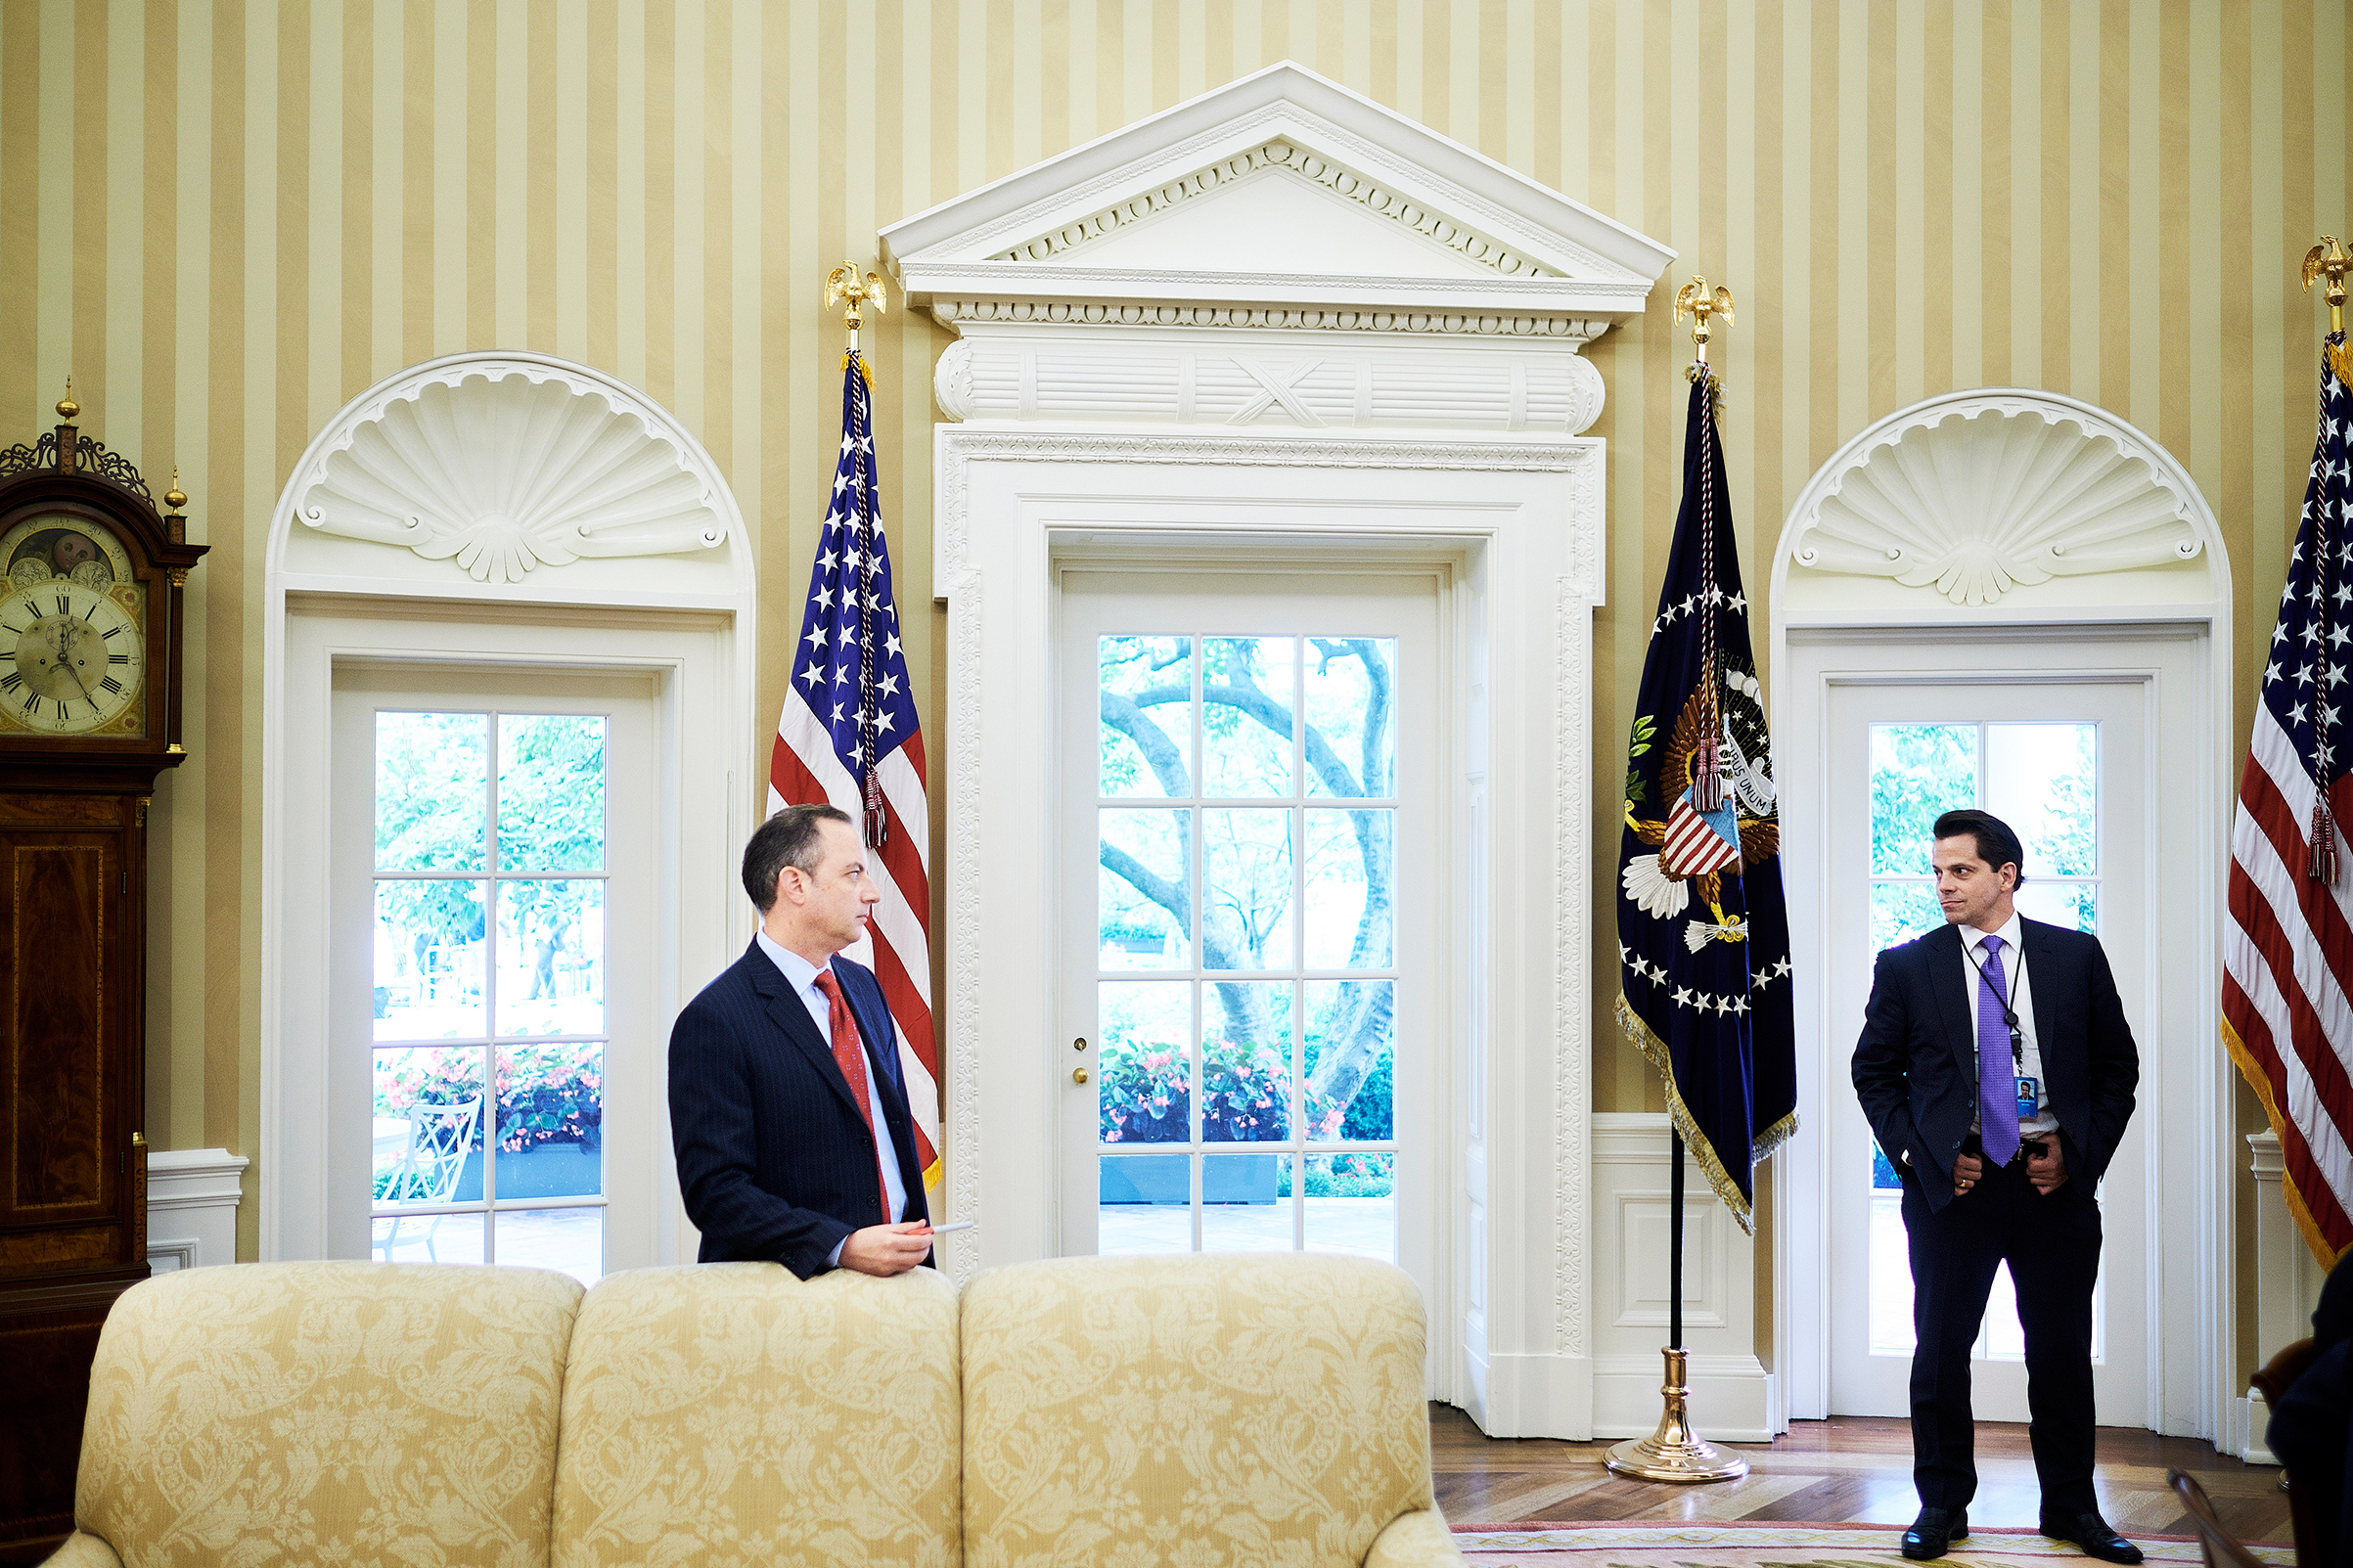 Reince Priebus, the Chief of Staff, and White House Communications Director Anthony Scaramucci in the Oval Office on July 25, 2017. (T.J. Kirkpatrick—The Wall Street Journal)